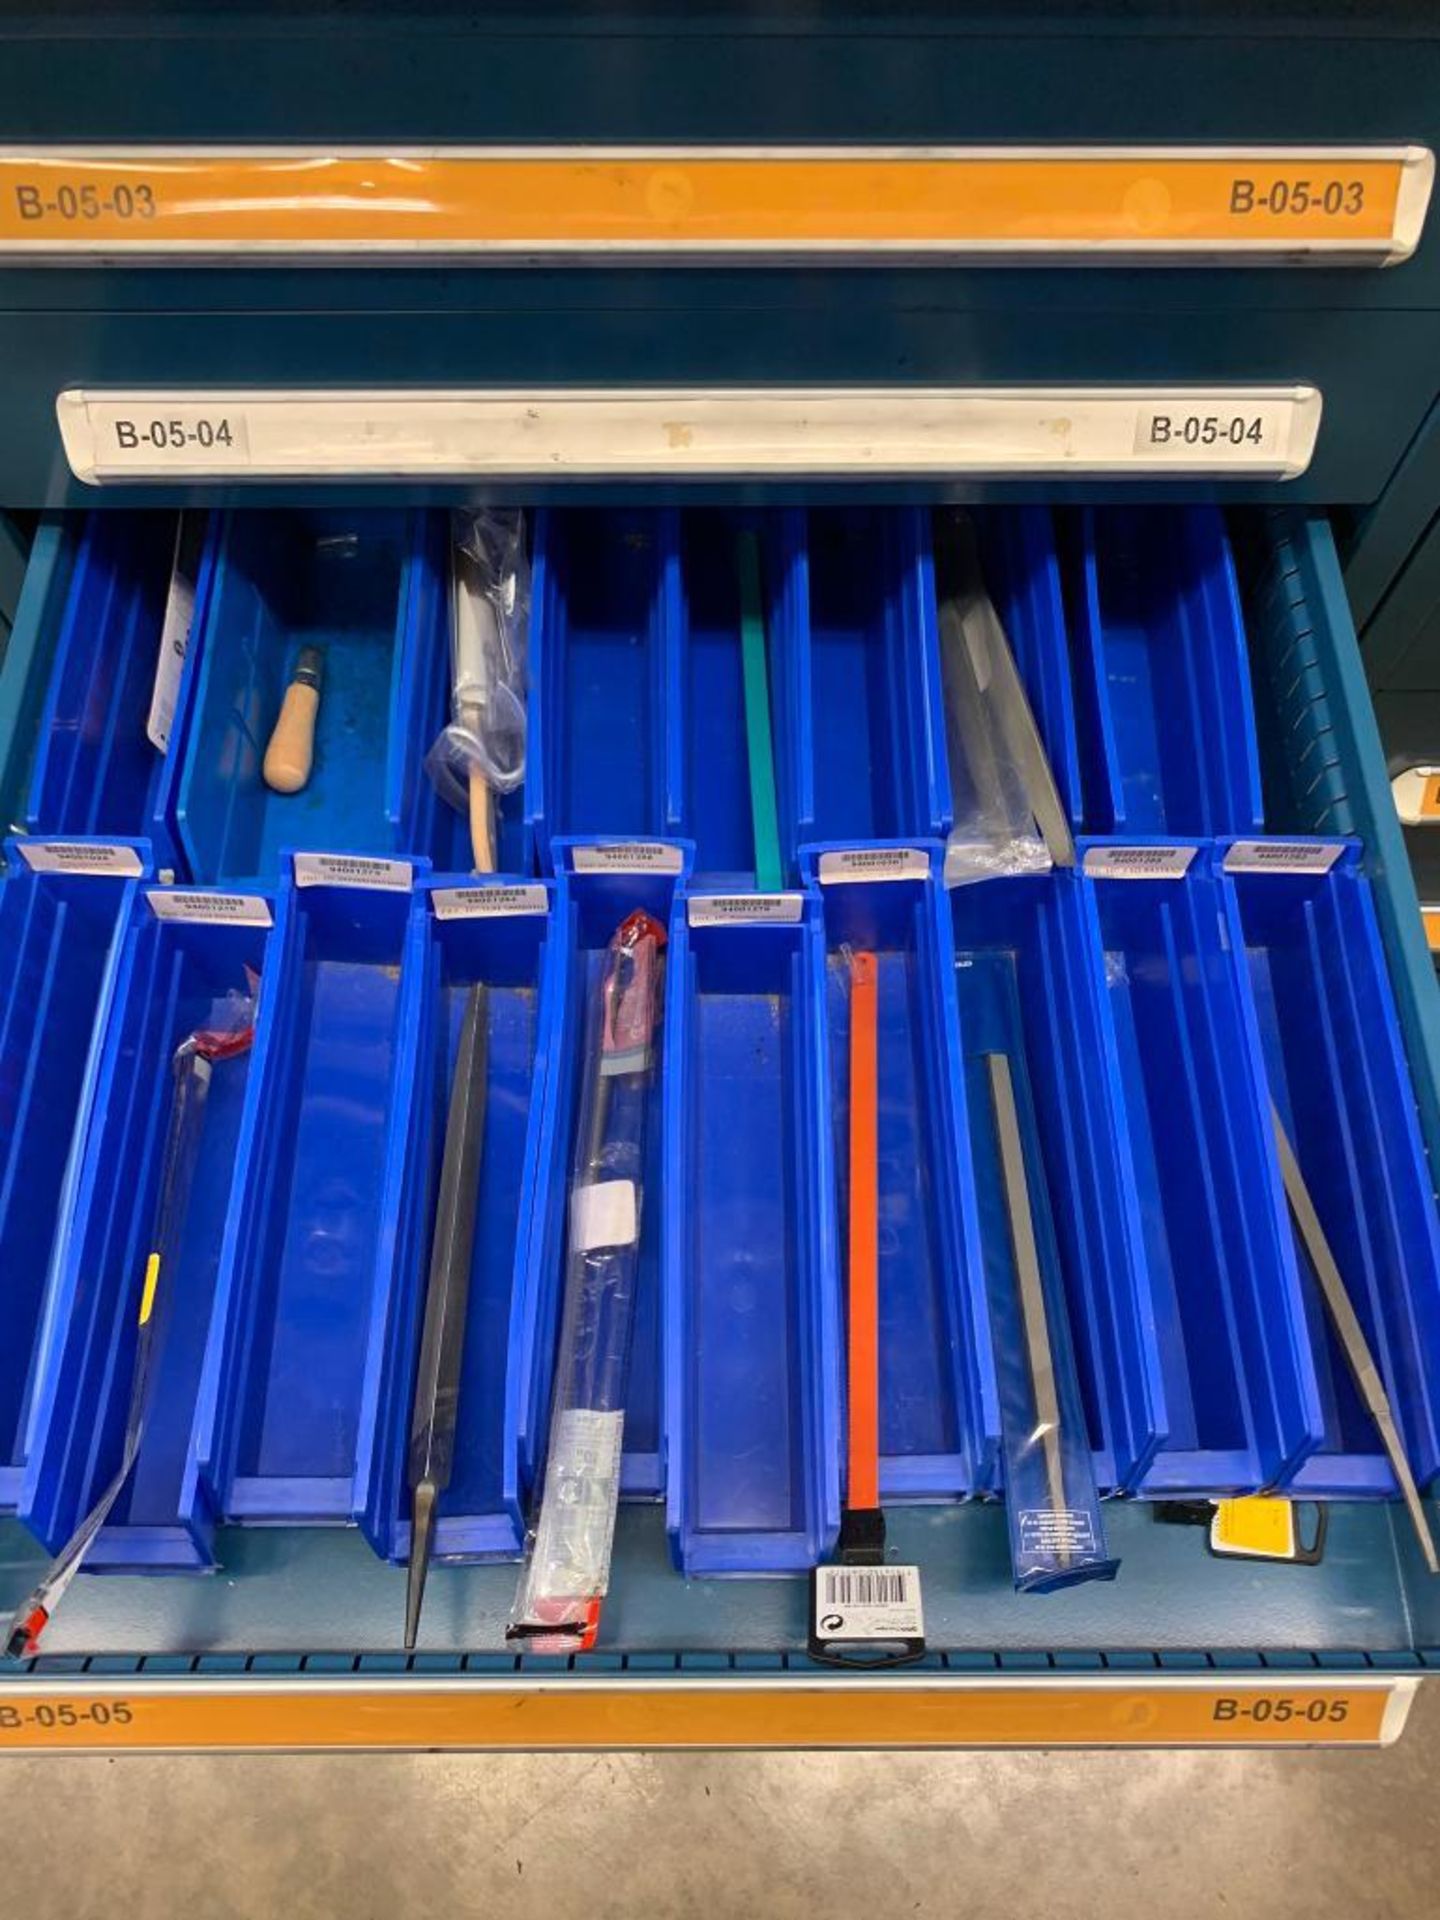 Vidmar 7-Drawer Cabinet w/ Assorted Files, Feeler Gage, Deburring Tools, Saw Blades - Image 6 of 8